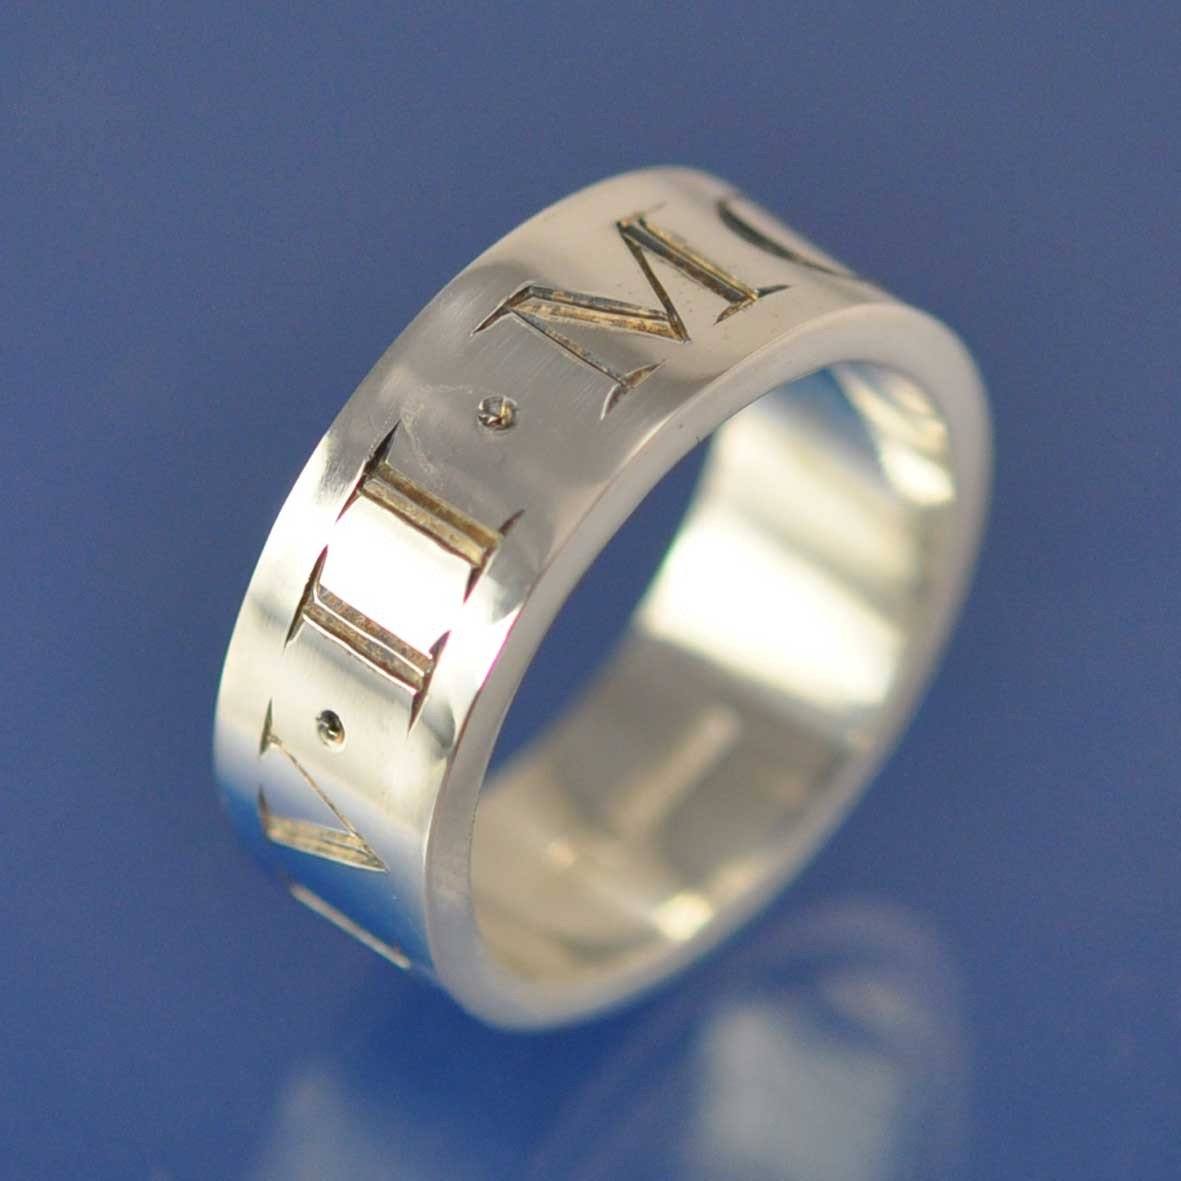 Roman Numeral Ring Ring by Chris Parry Jewellery